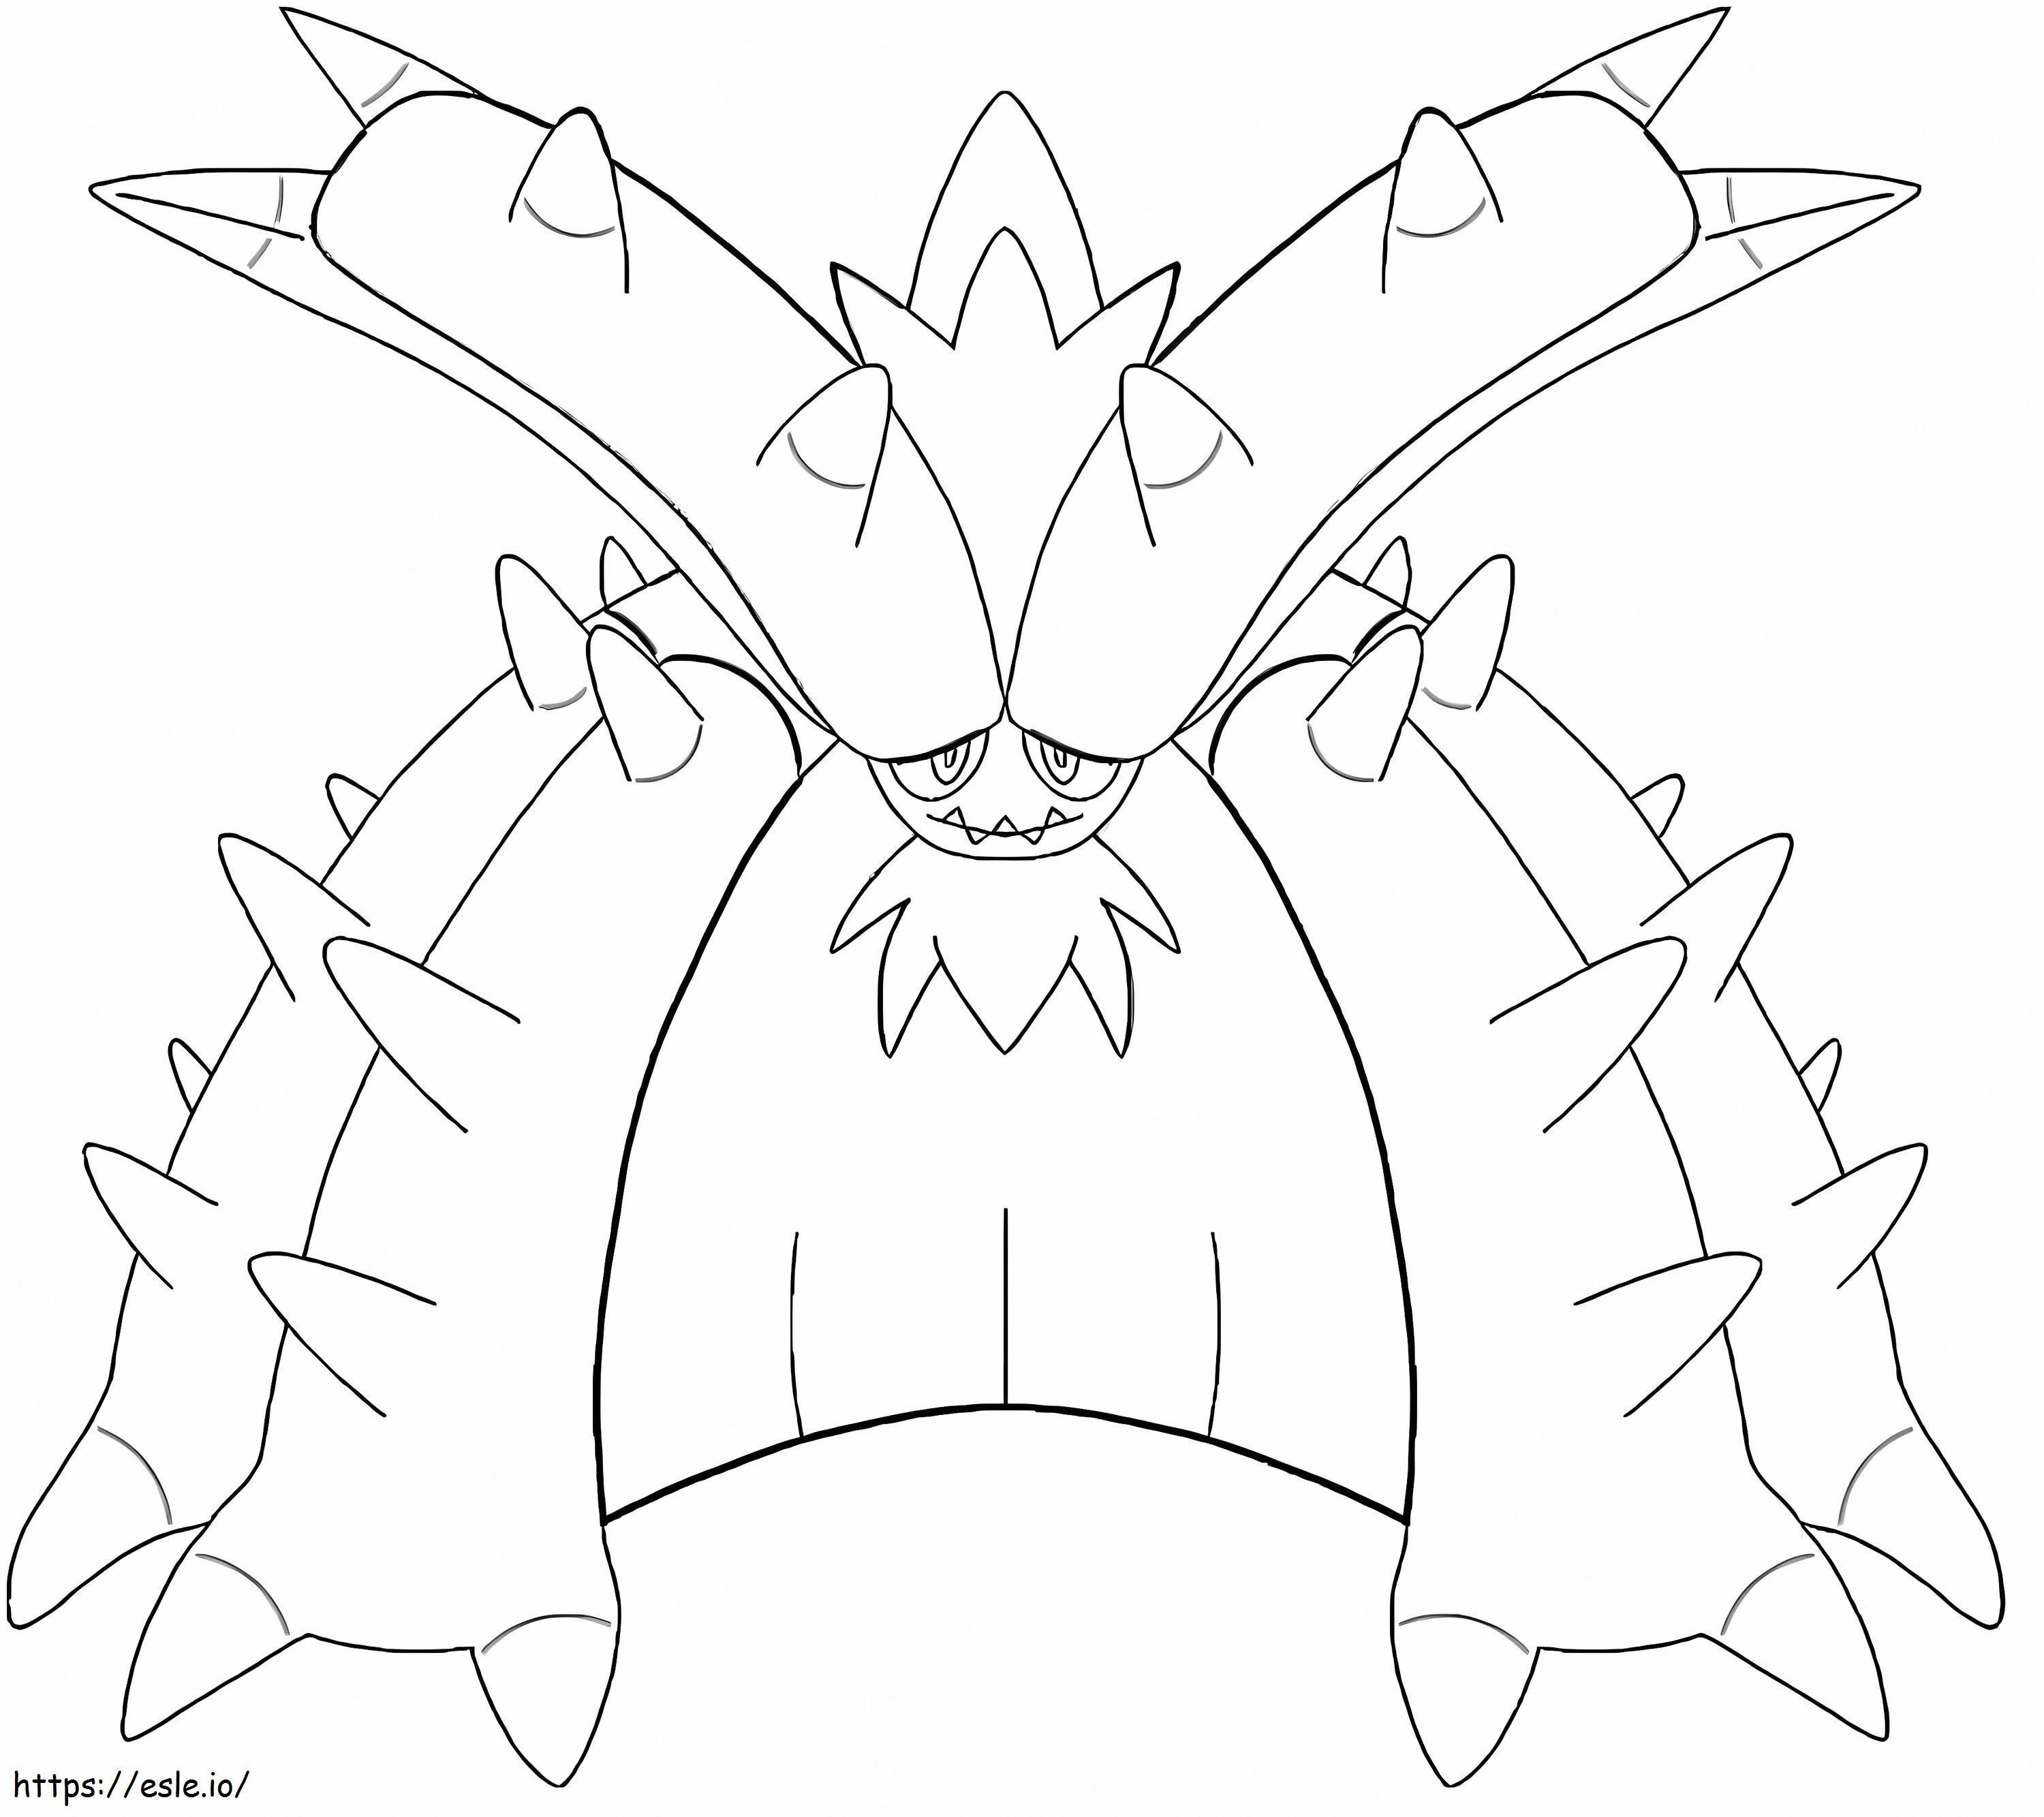 Toxapex Pokemon 3 coloring page